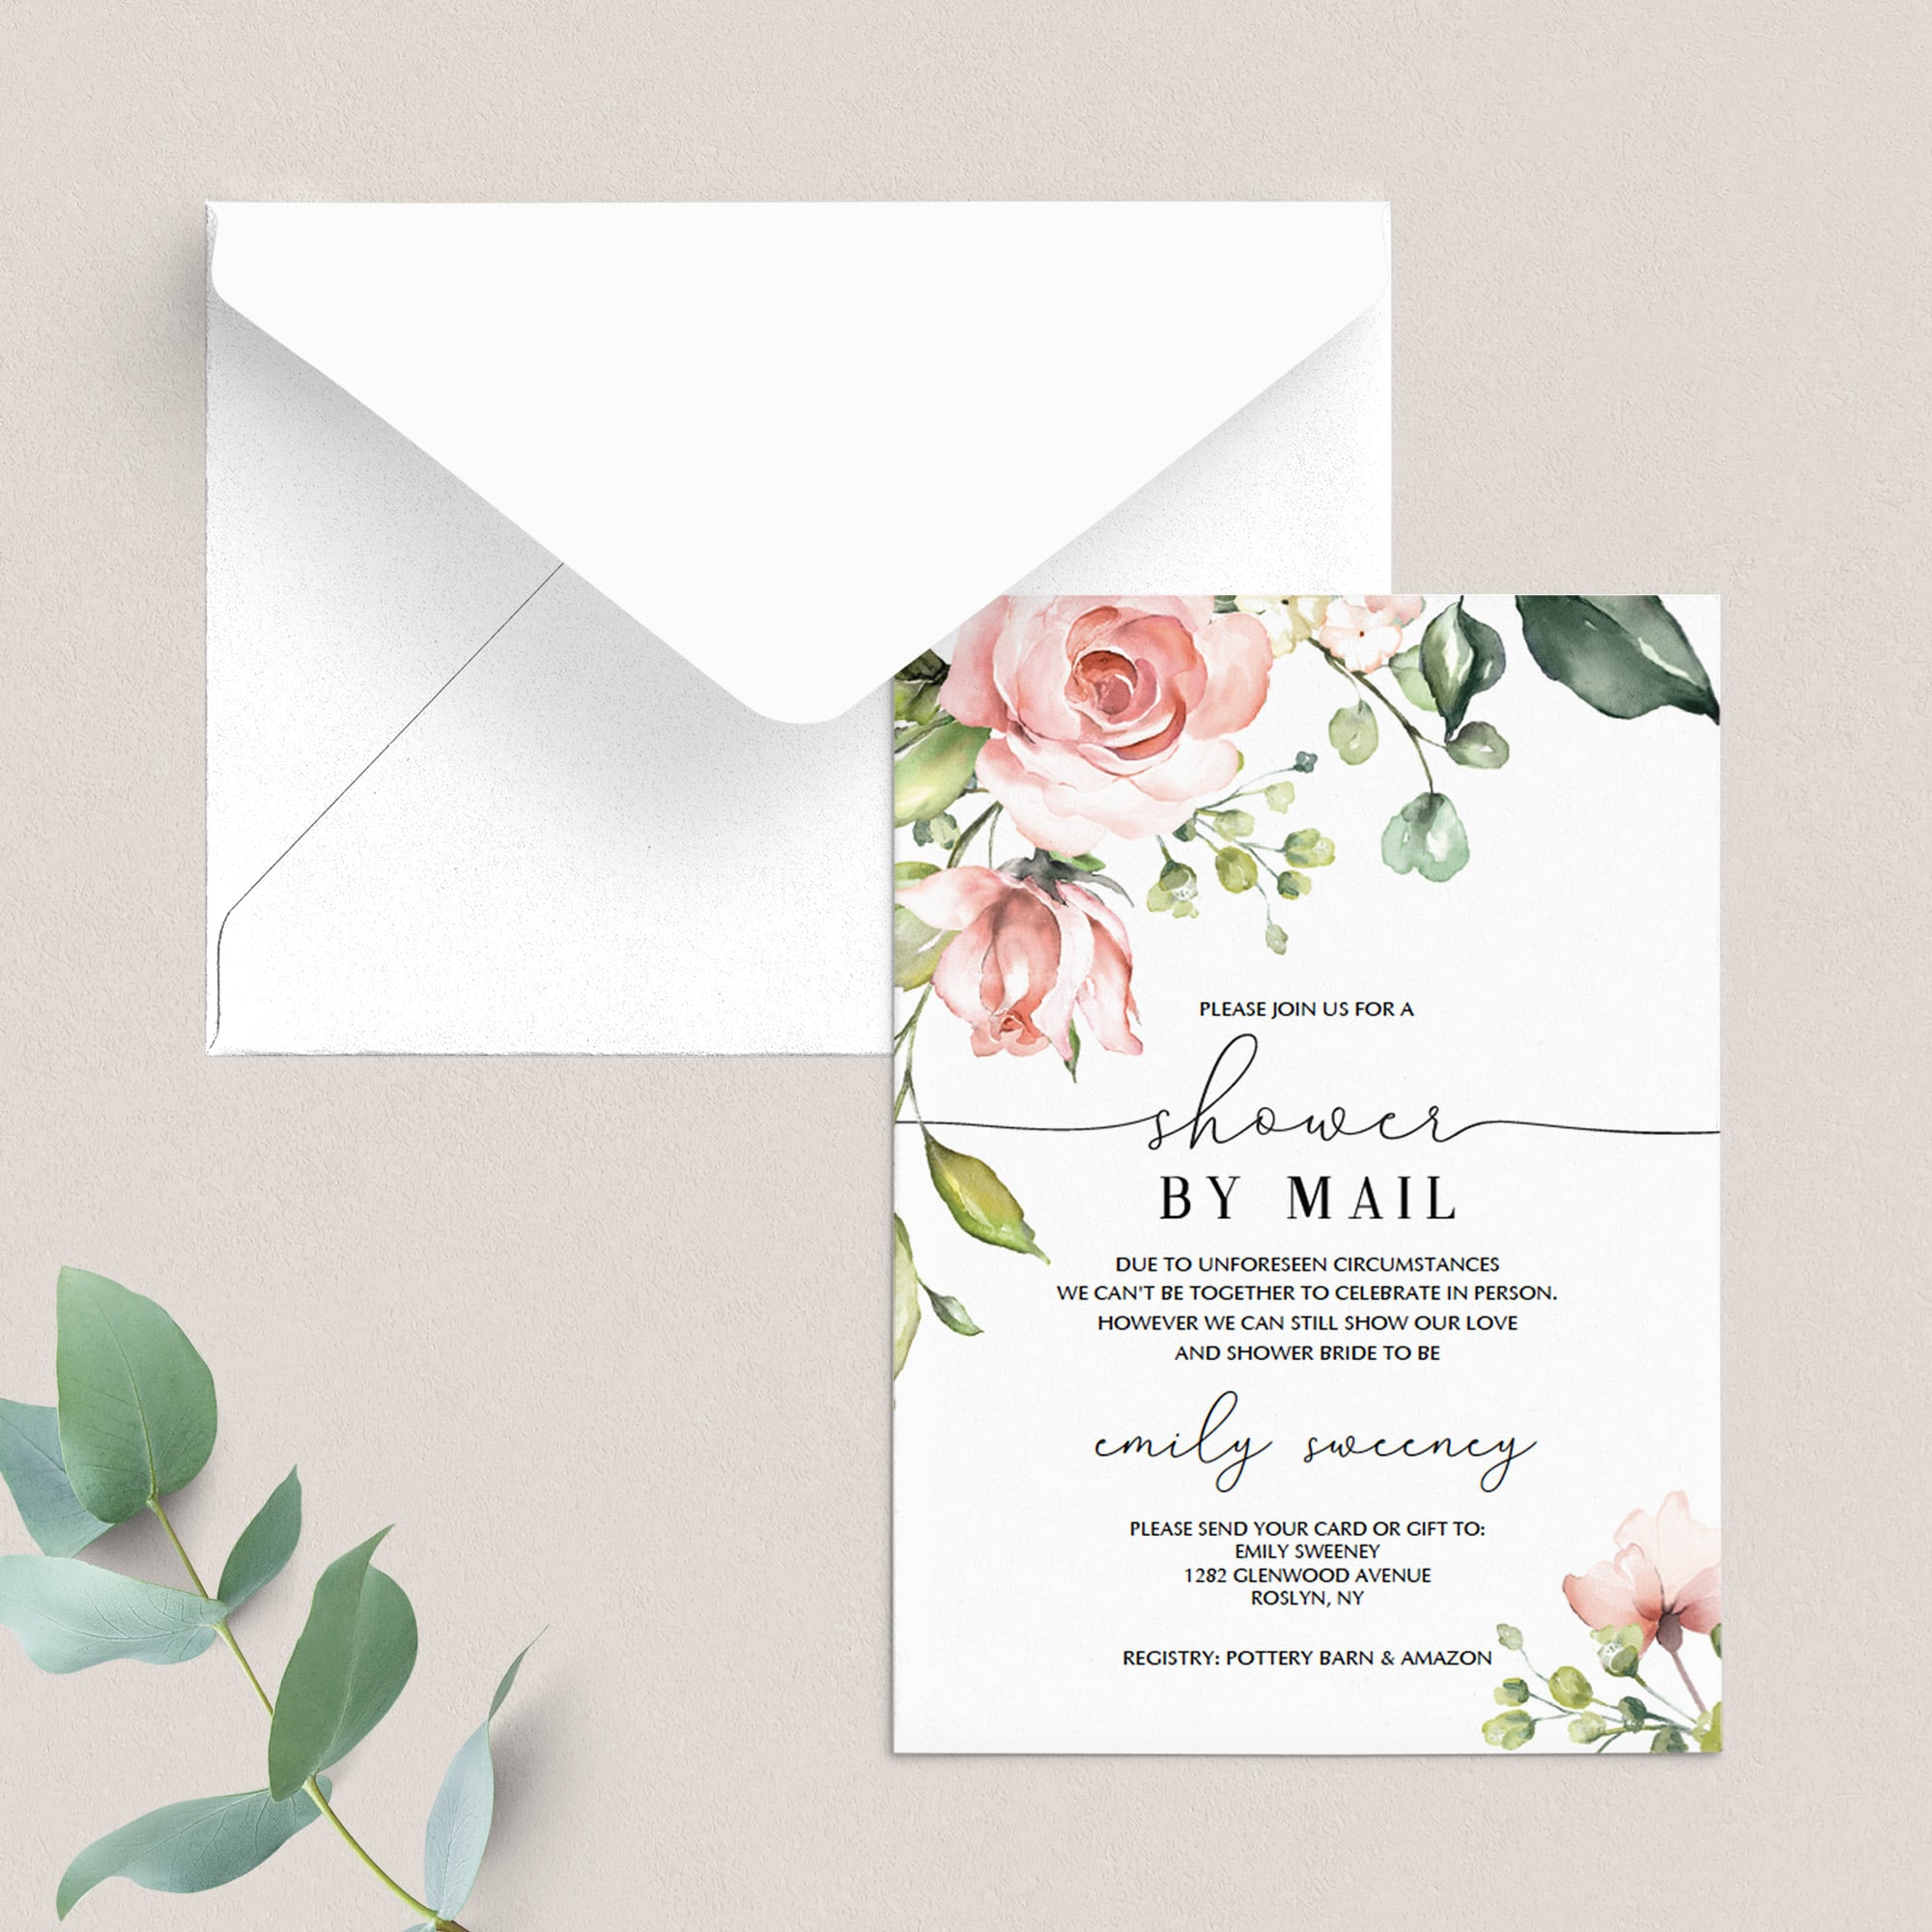 Bridal shower by mail invitation template by LittleSizzle